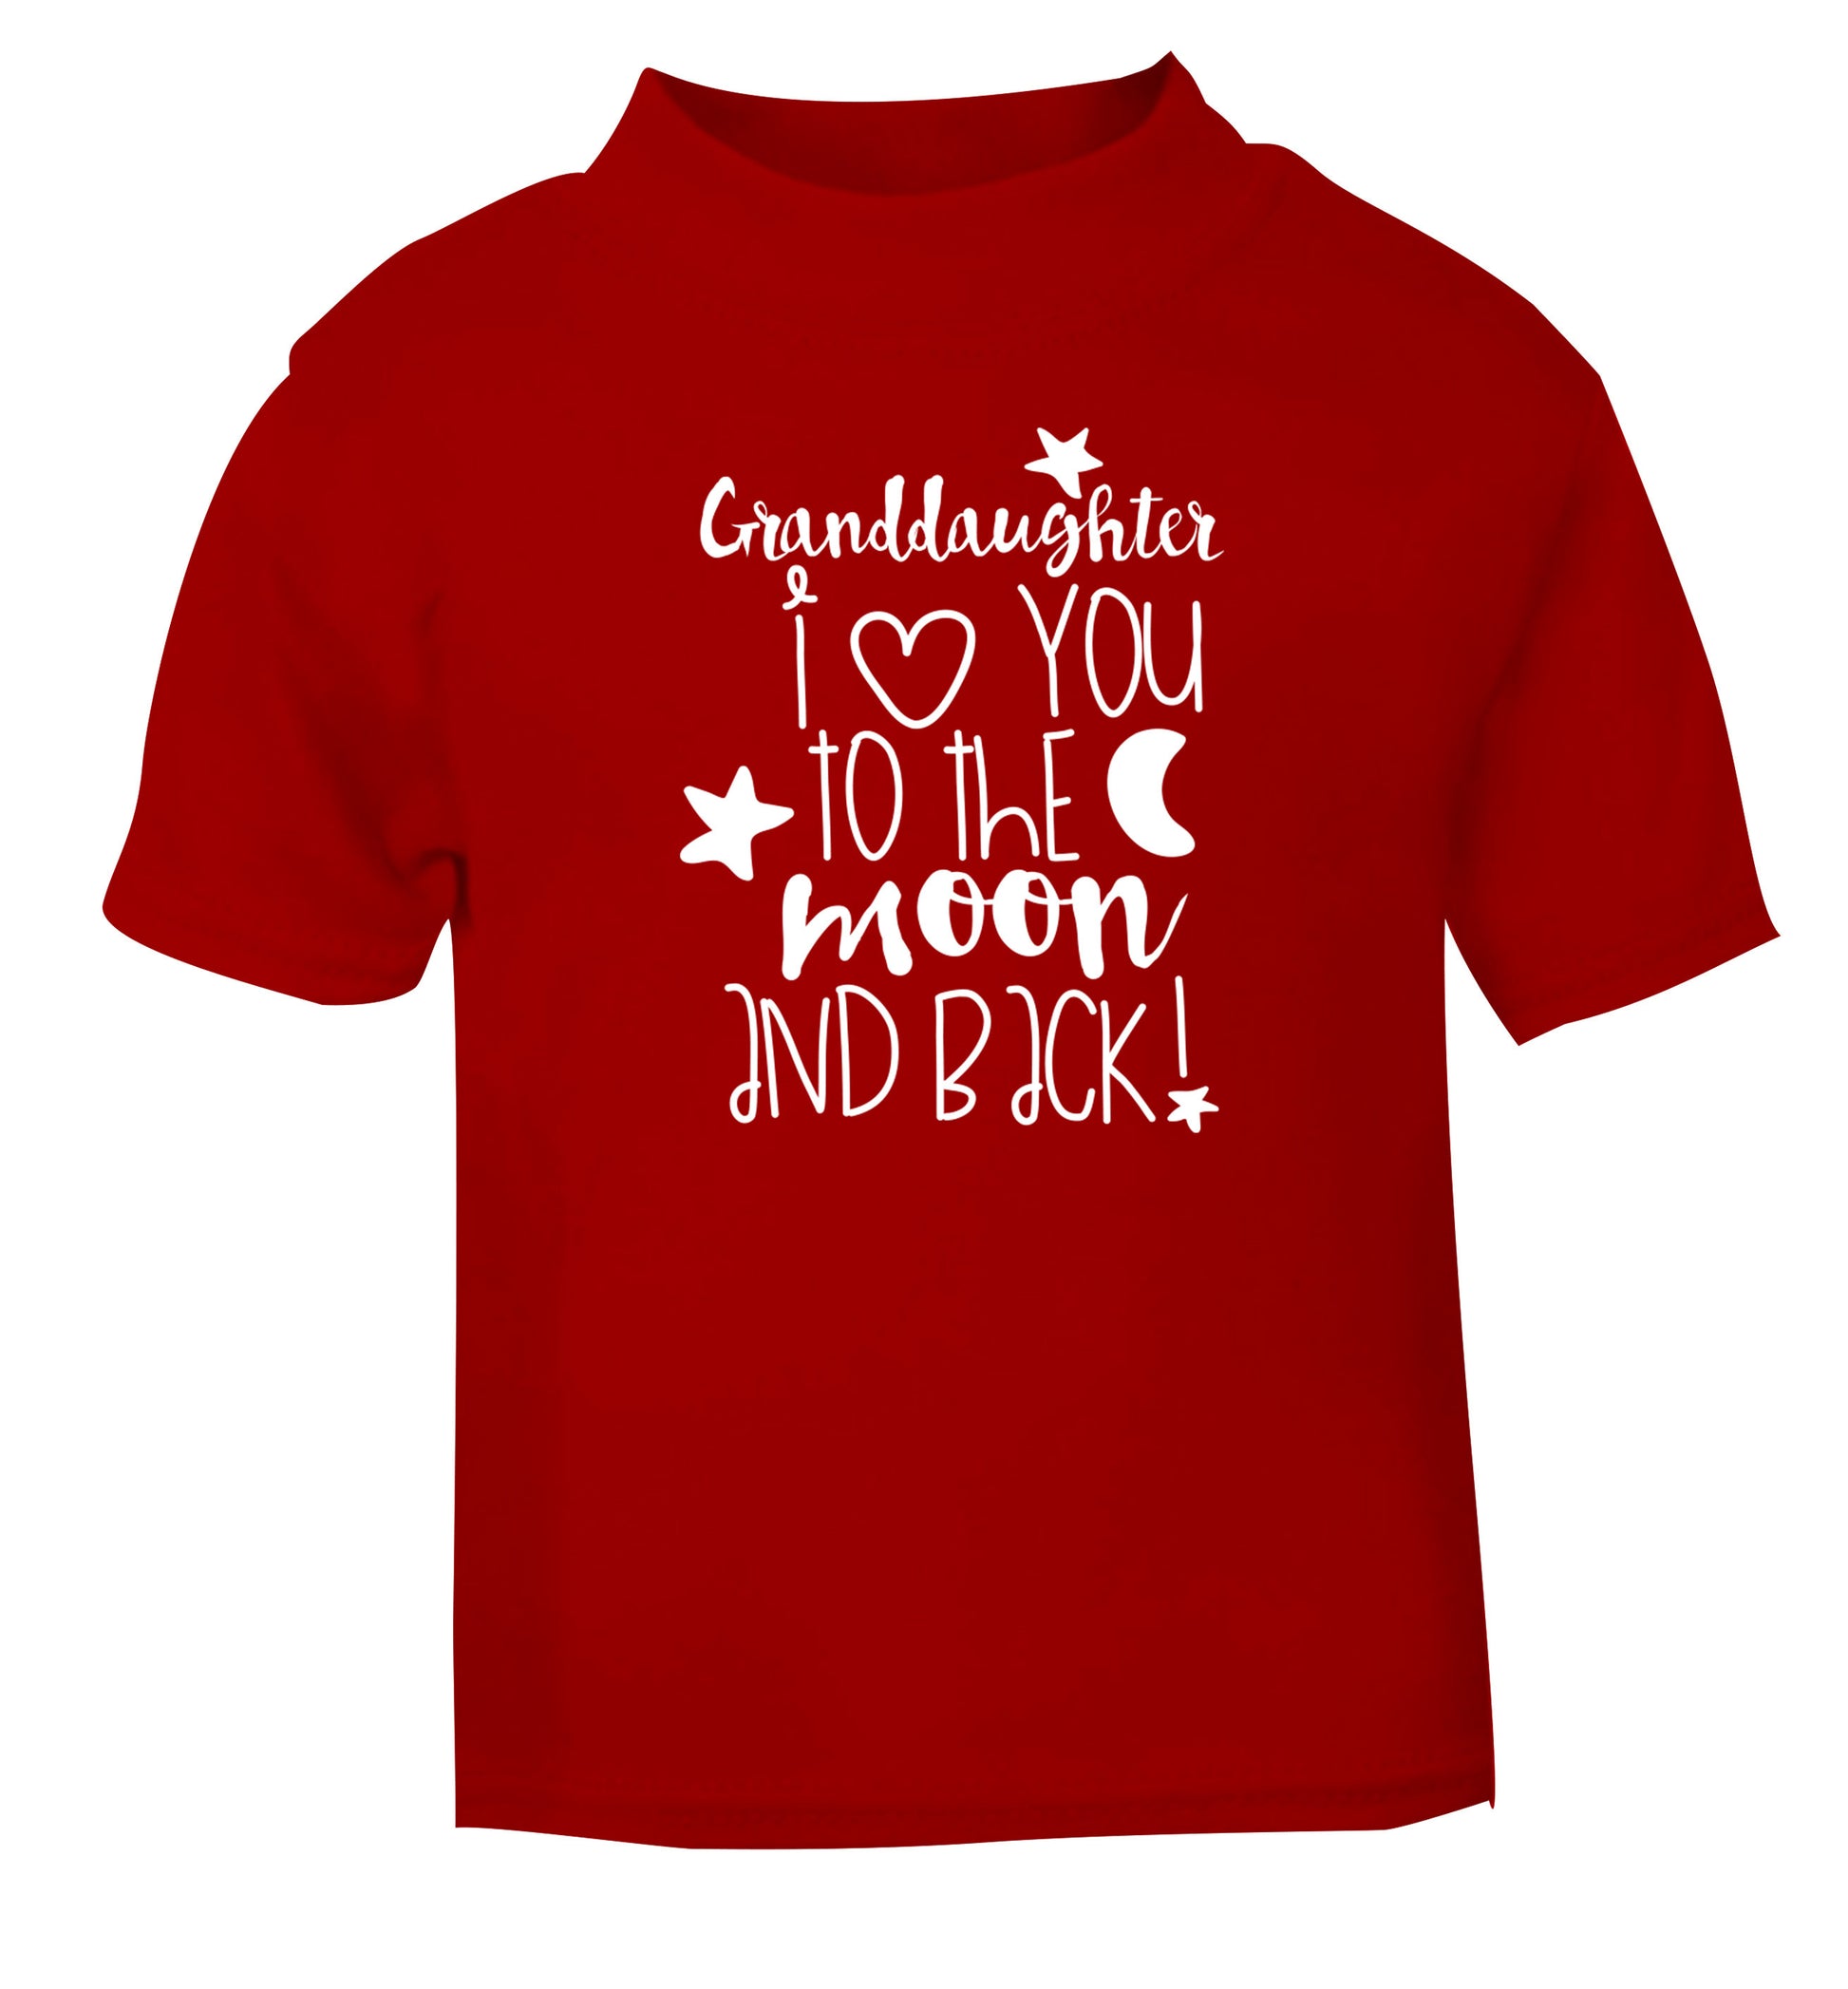 Granddaughter I love you to the moon and back red Baby Toddler Tshirt 2 Years